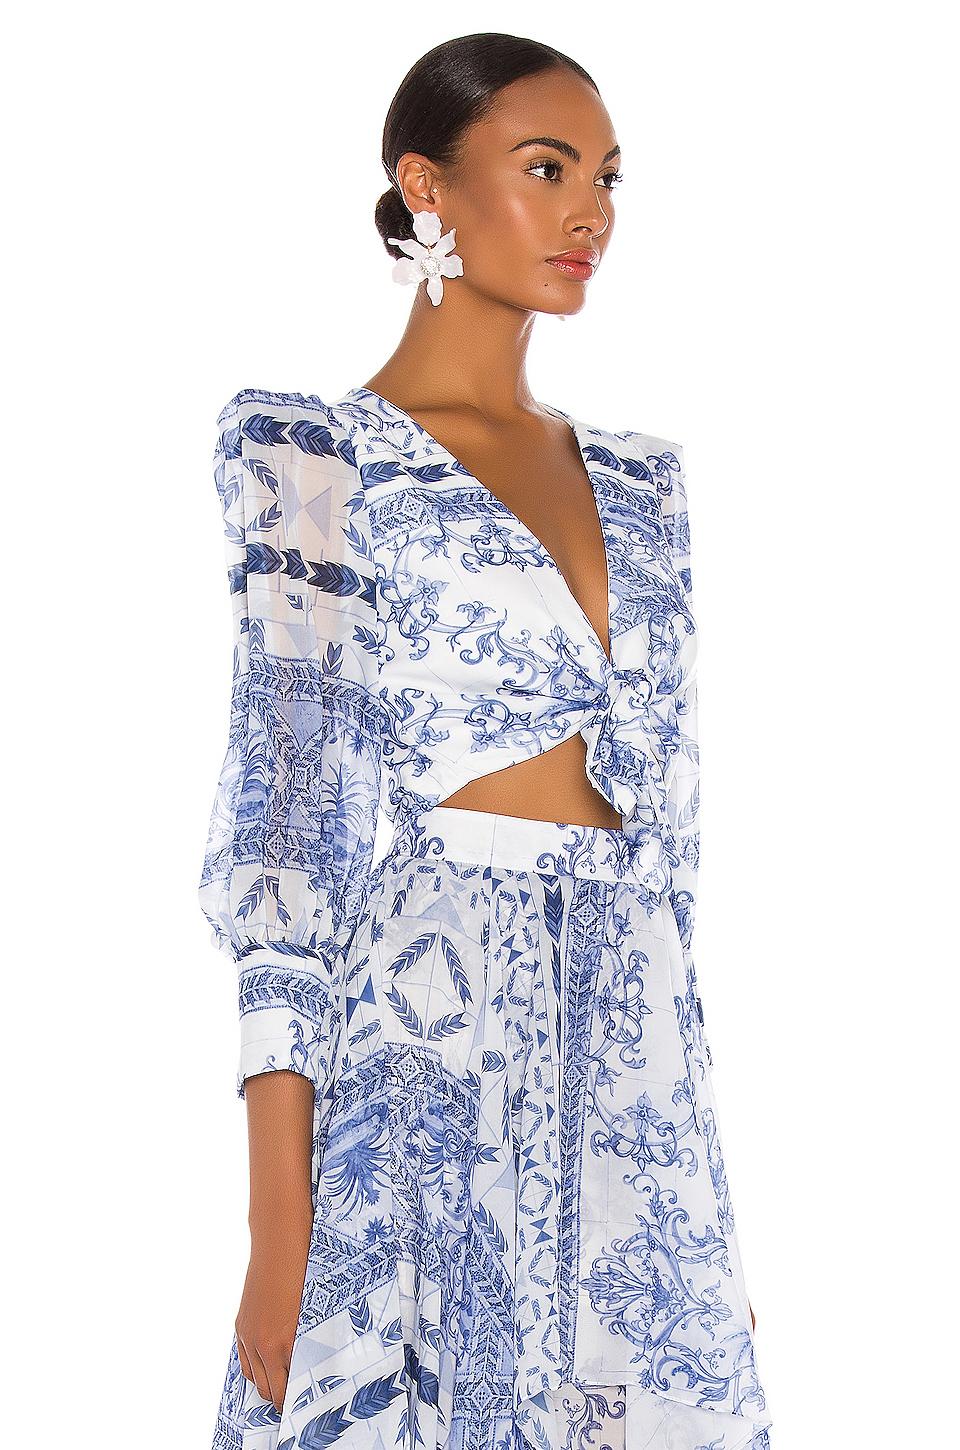 PATBO Chiffon Amalfi Tie Front Cropped Top in Blue & White (Blue) - Lyst